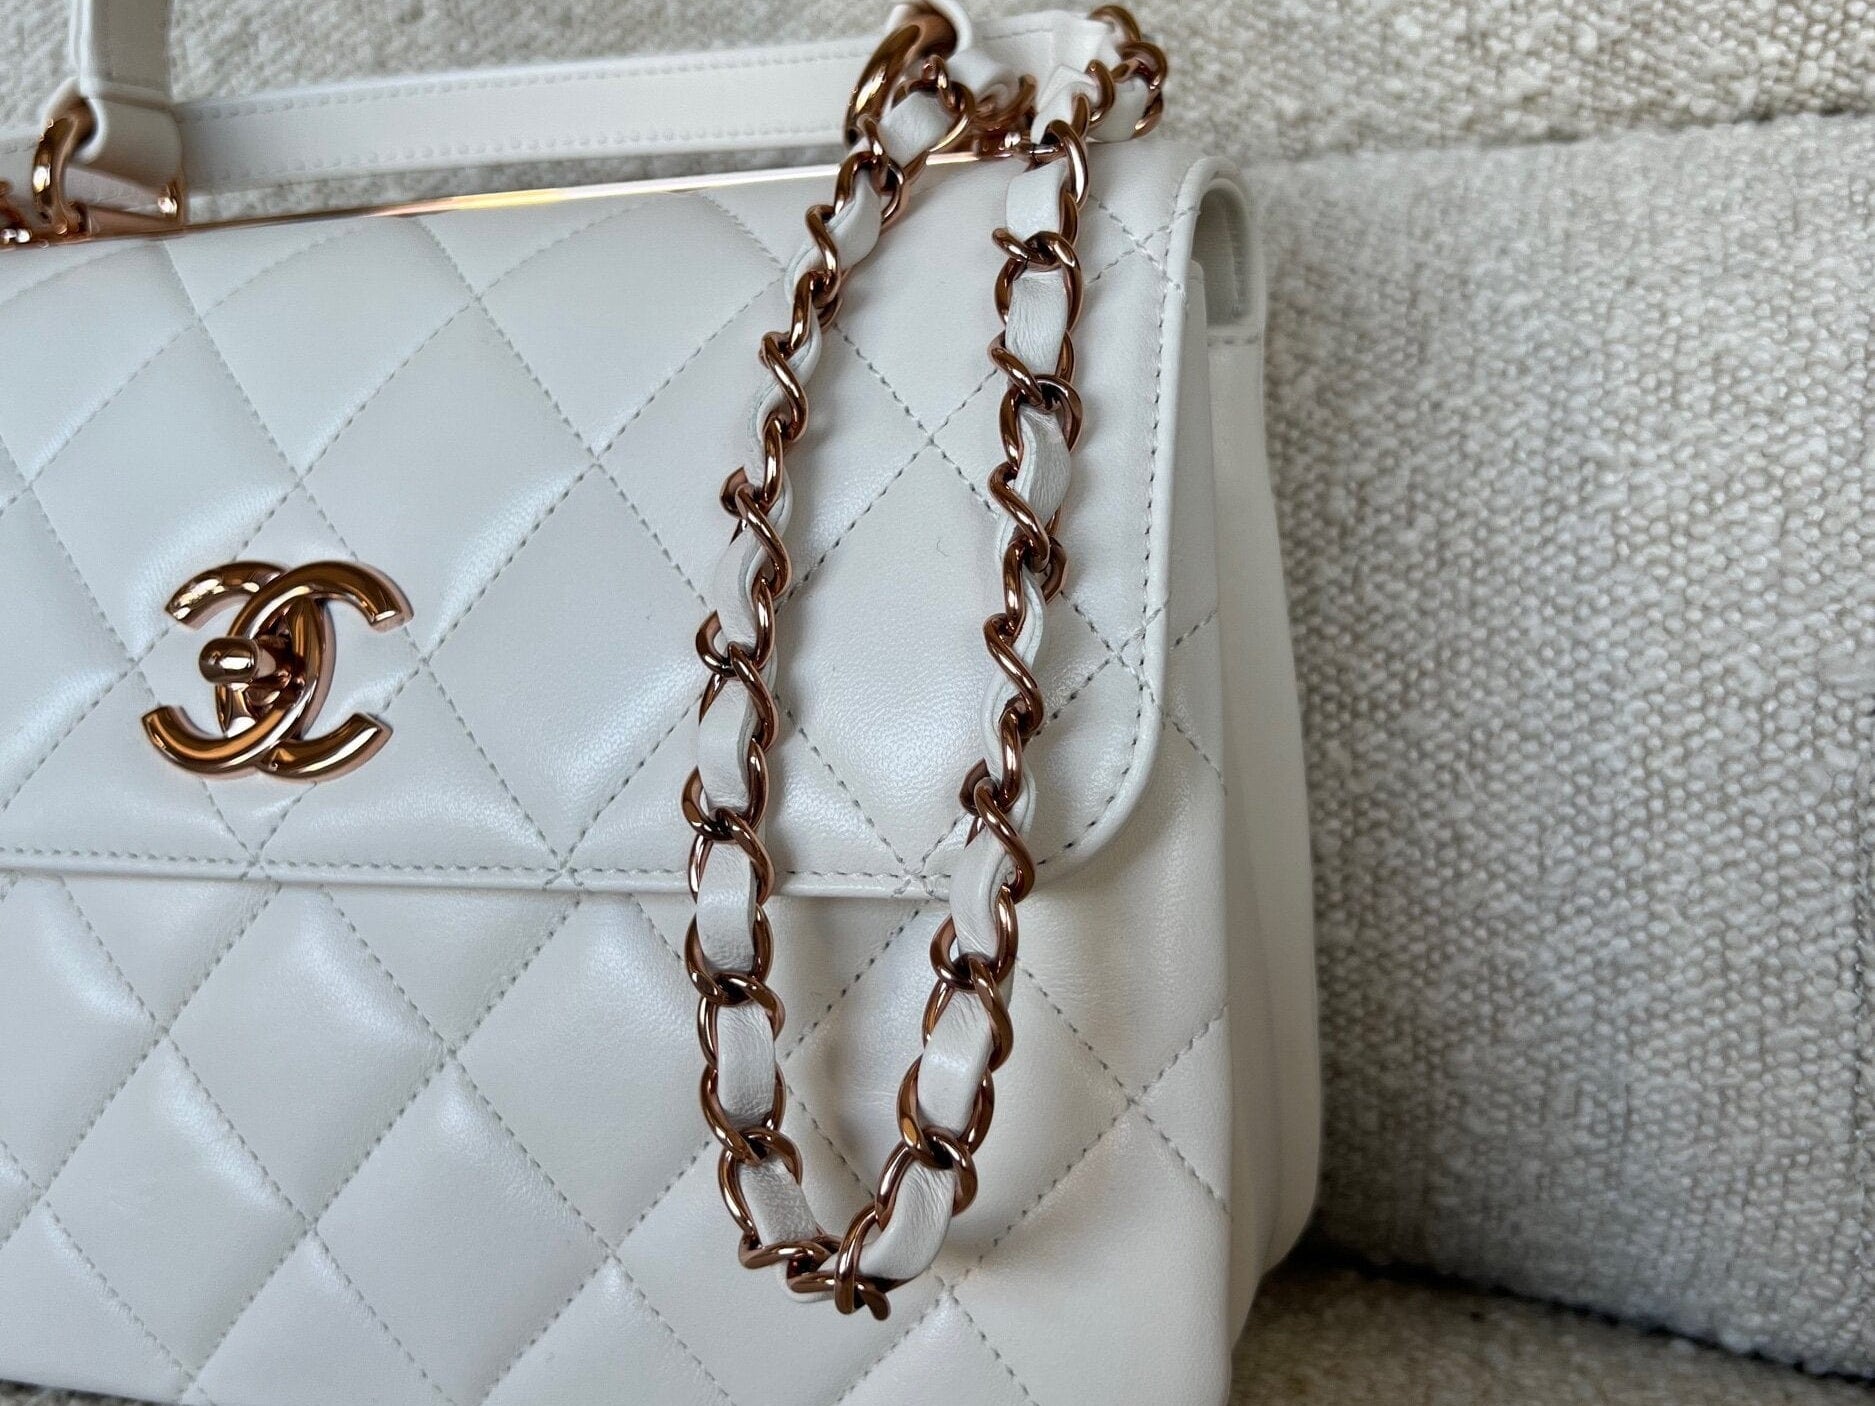 CHANEL Handbag Chanel 21B Small White Lambskin Quilted Trendy CC w/ Rose Gold Hardware - Redeluxe